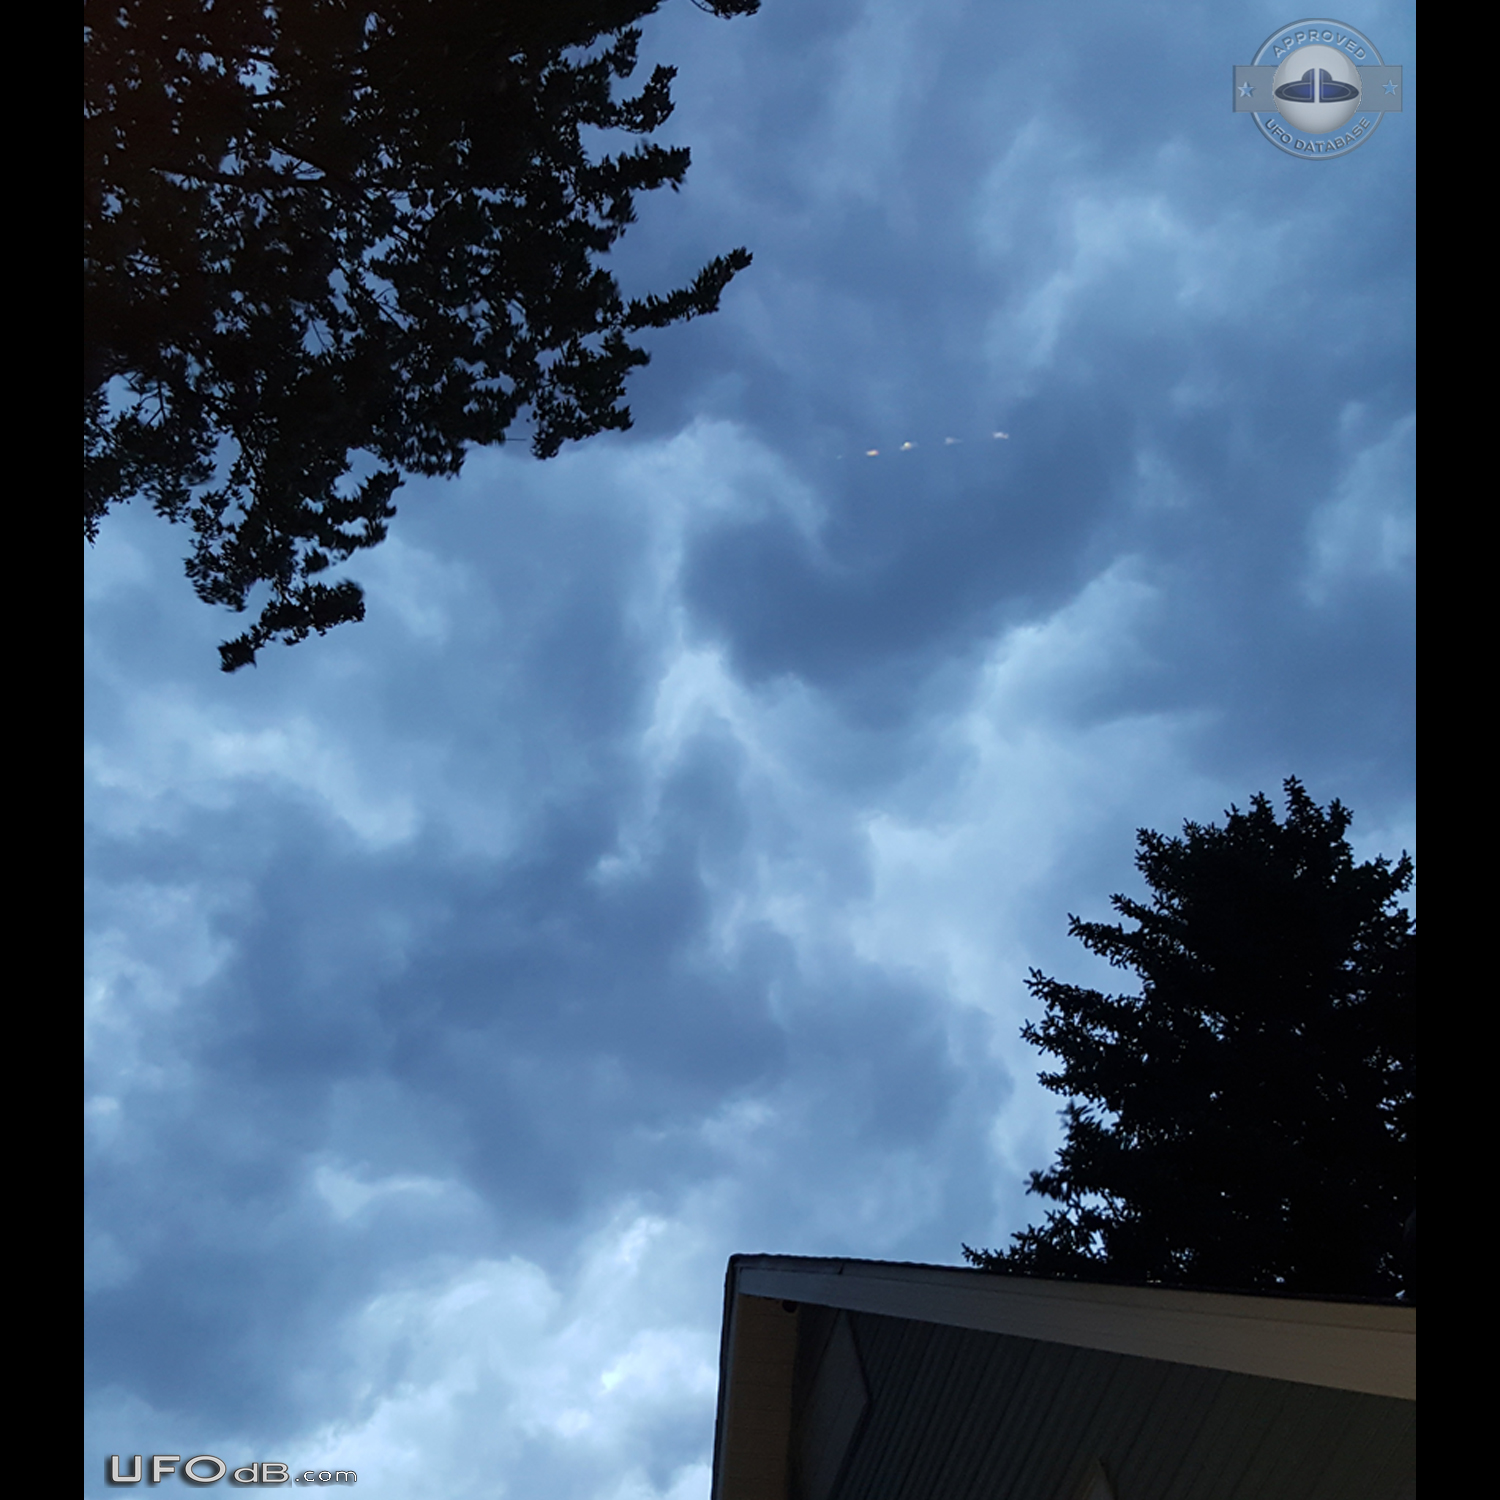 Looked like 5 disks UFOs appeared then disappeared just as fast - Indi UFO Picture #800-2